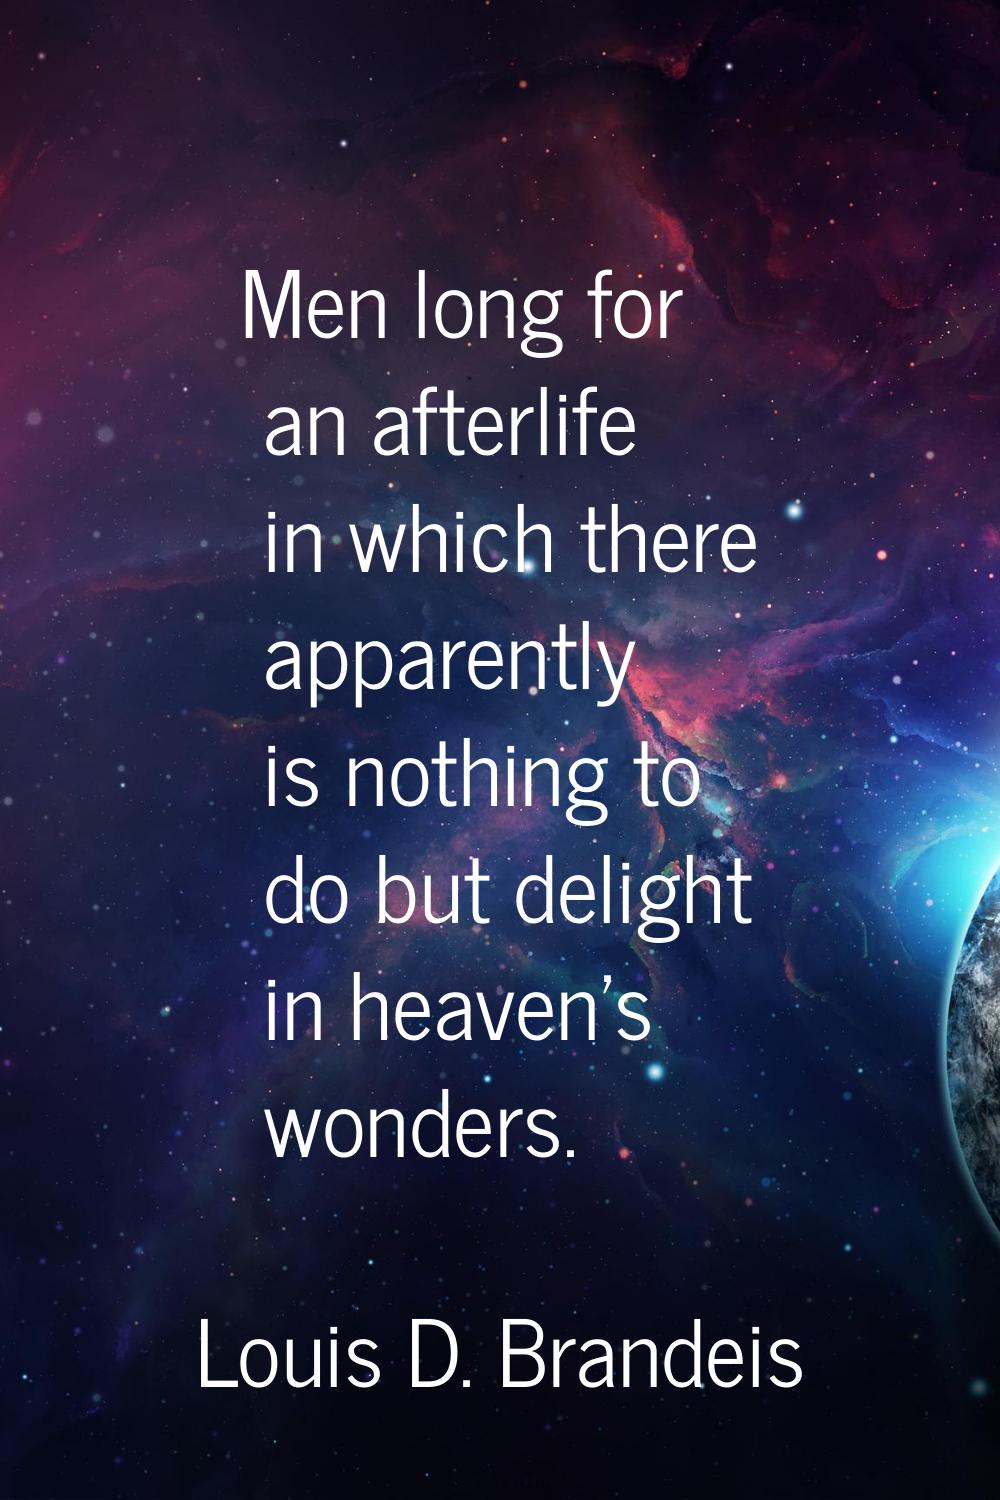 Men long for an afterlife in which there apparently is nothing to do but delight in heaven's wonder